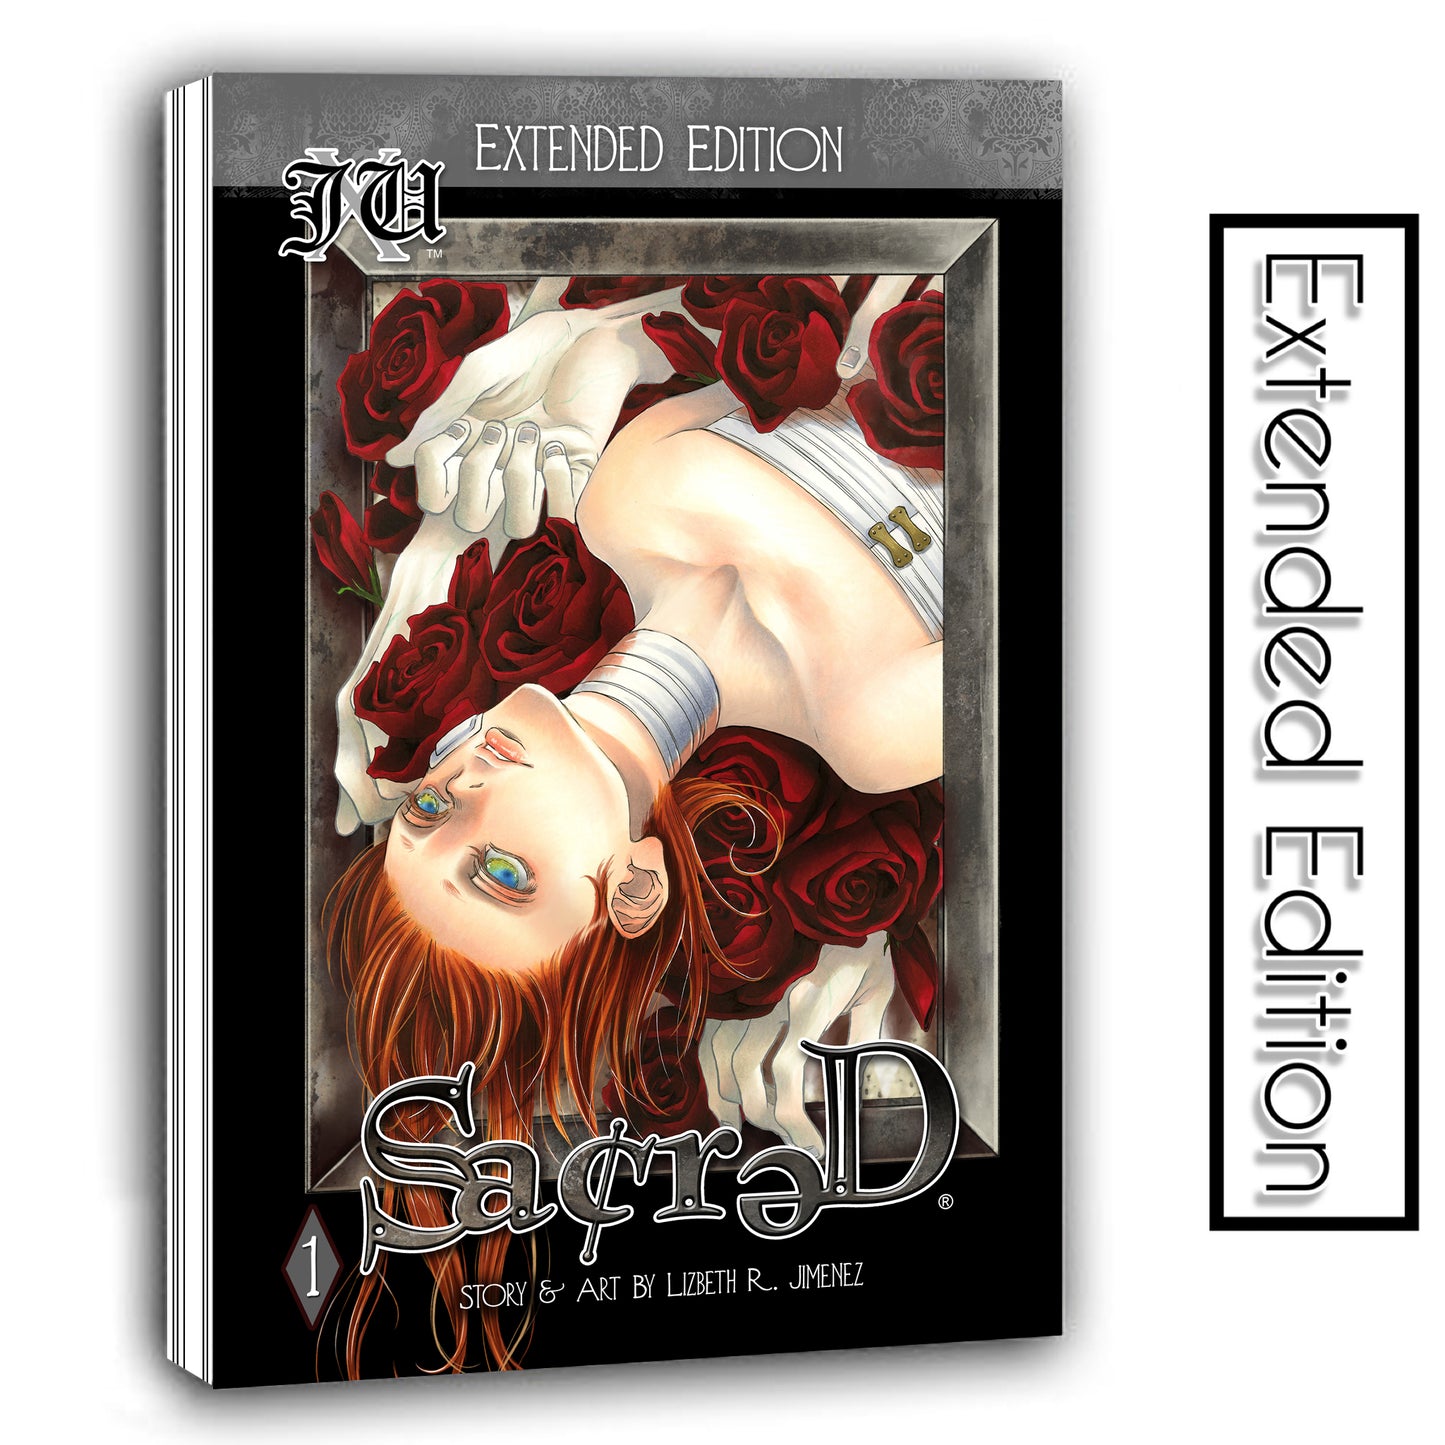 Sacred, volume 1 [Extended Edition]